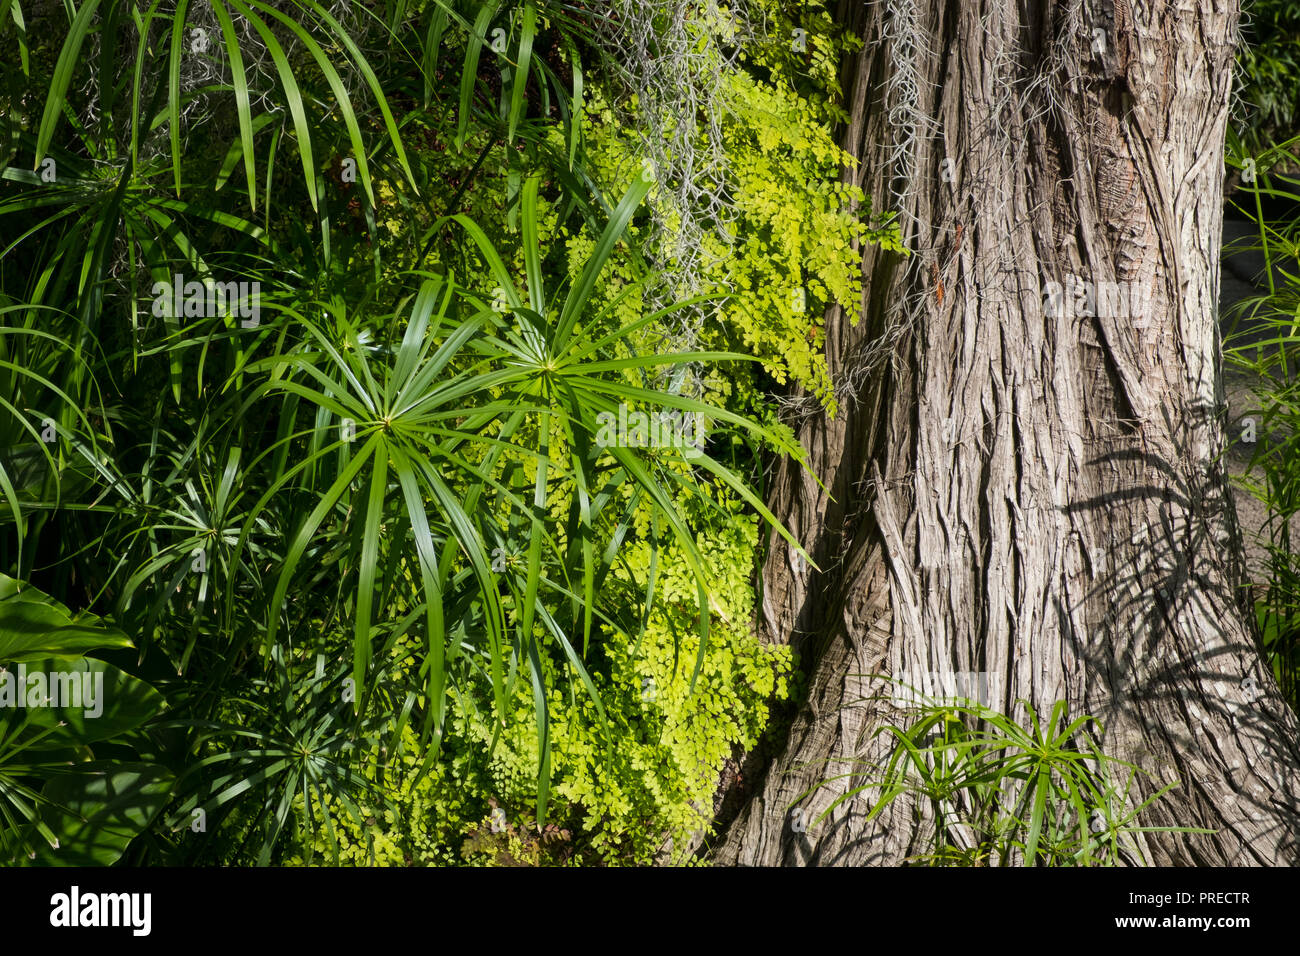 tree trunk overgrowing plants in tropical forest Stock Photo